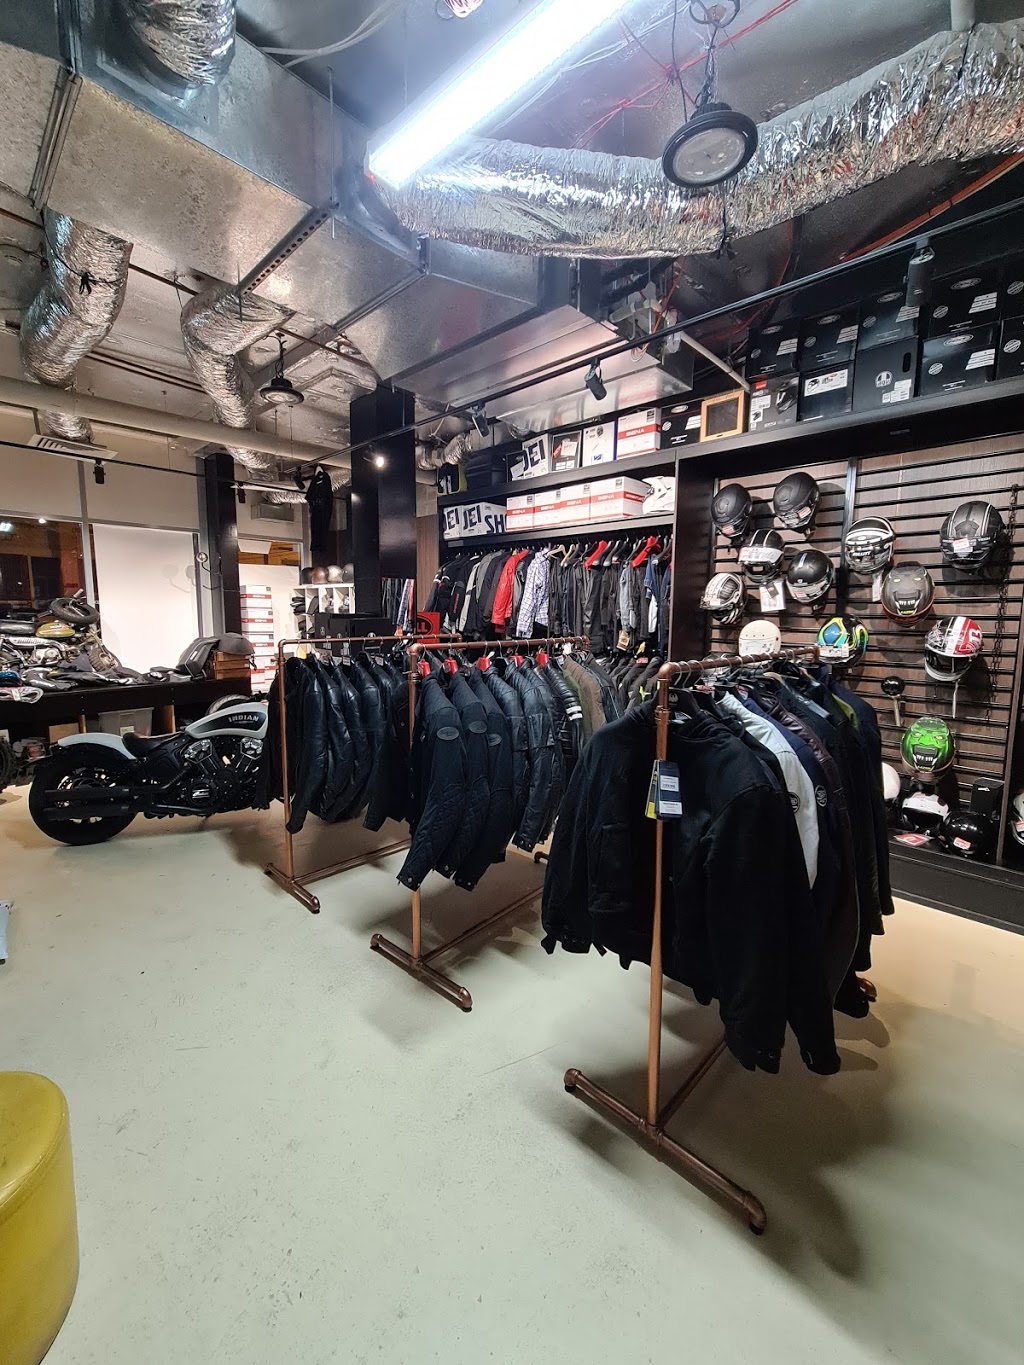 Motorcycle Stuff Sydney (concept store) | right next to the BP Servo, SHOP 3/38 Princes Hwy, St Peters NSW 2044, Australia | Phone: 1300 282 382